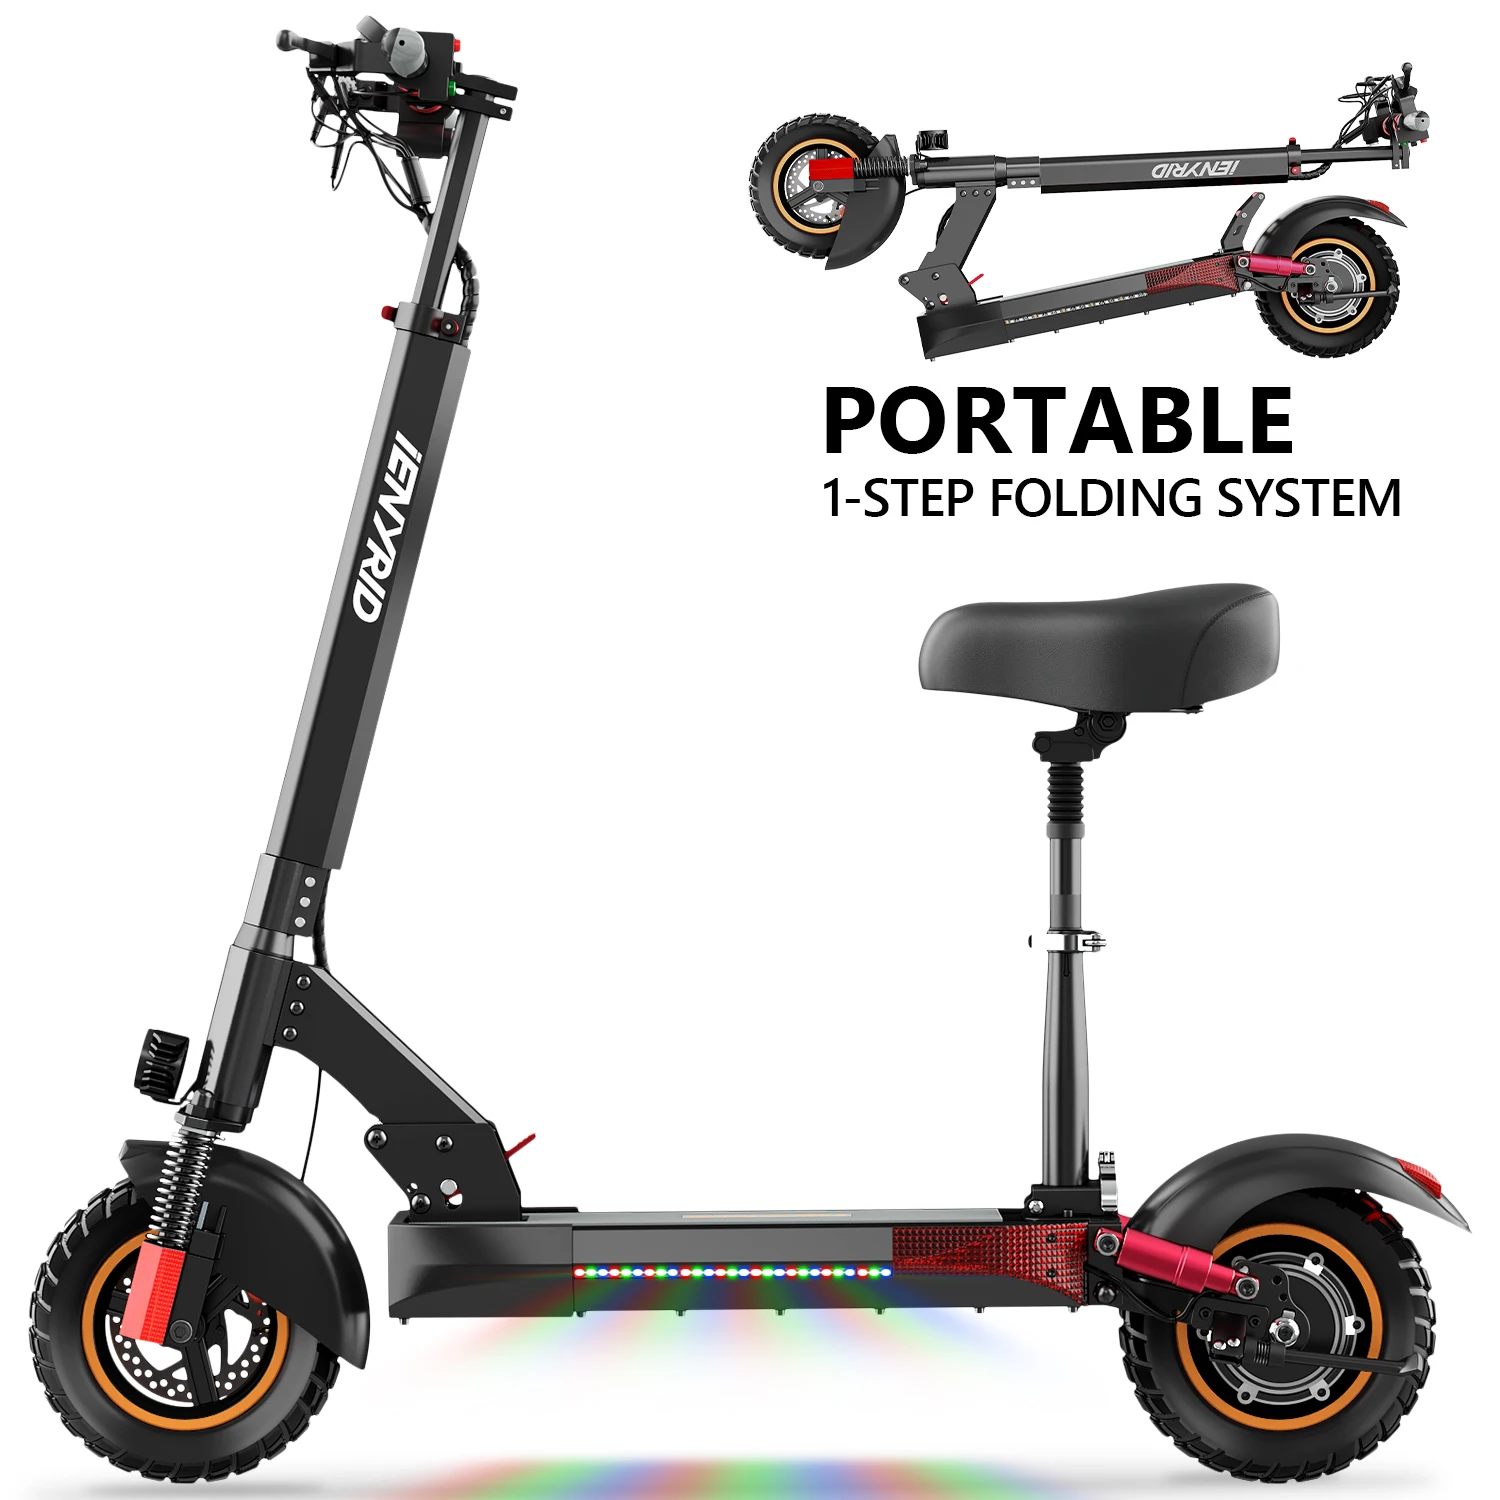 

Europe USA UK warehouse drop shipping iE KUGOO M4 PRO S scooters and electric scooters 10inch 500W 48V foldable electric scooter